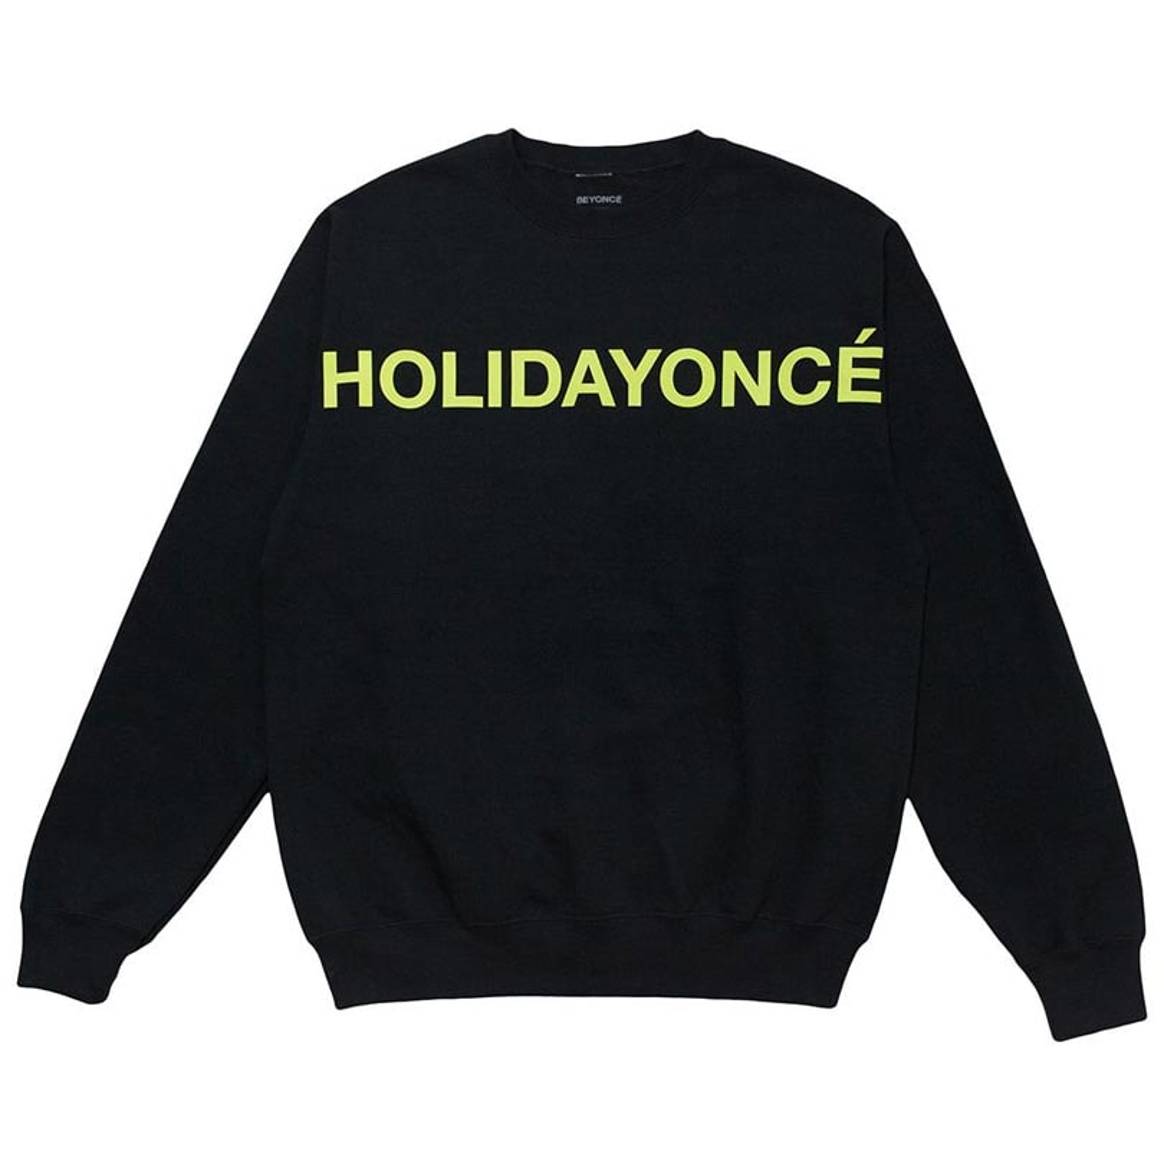 Beyonce unveils line of holiday-themed merchandise